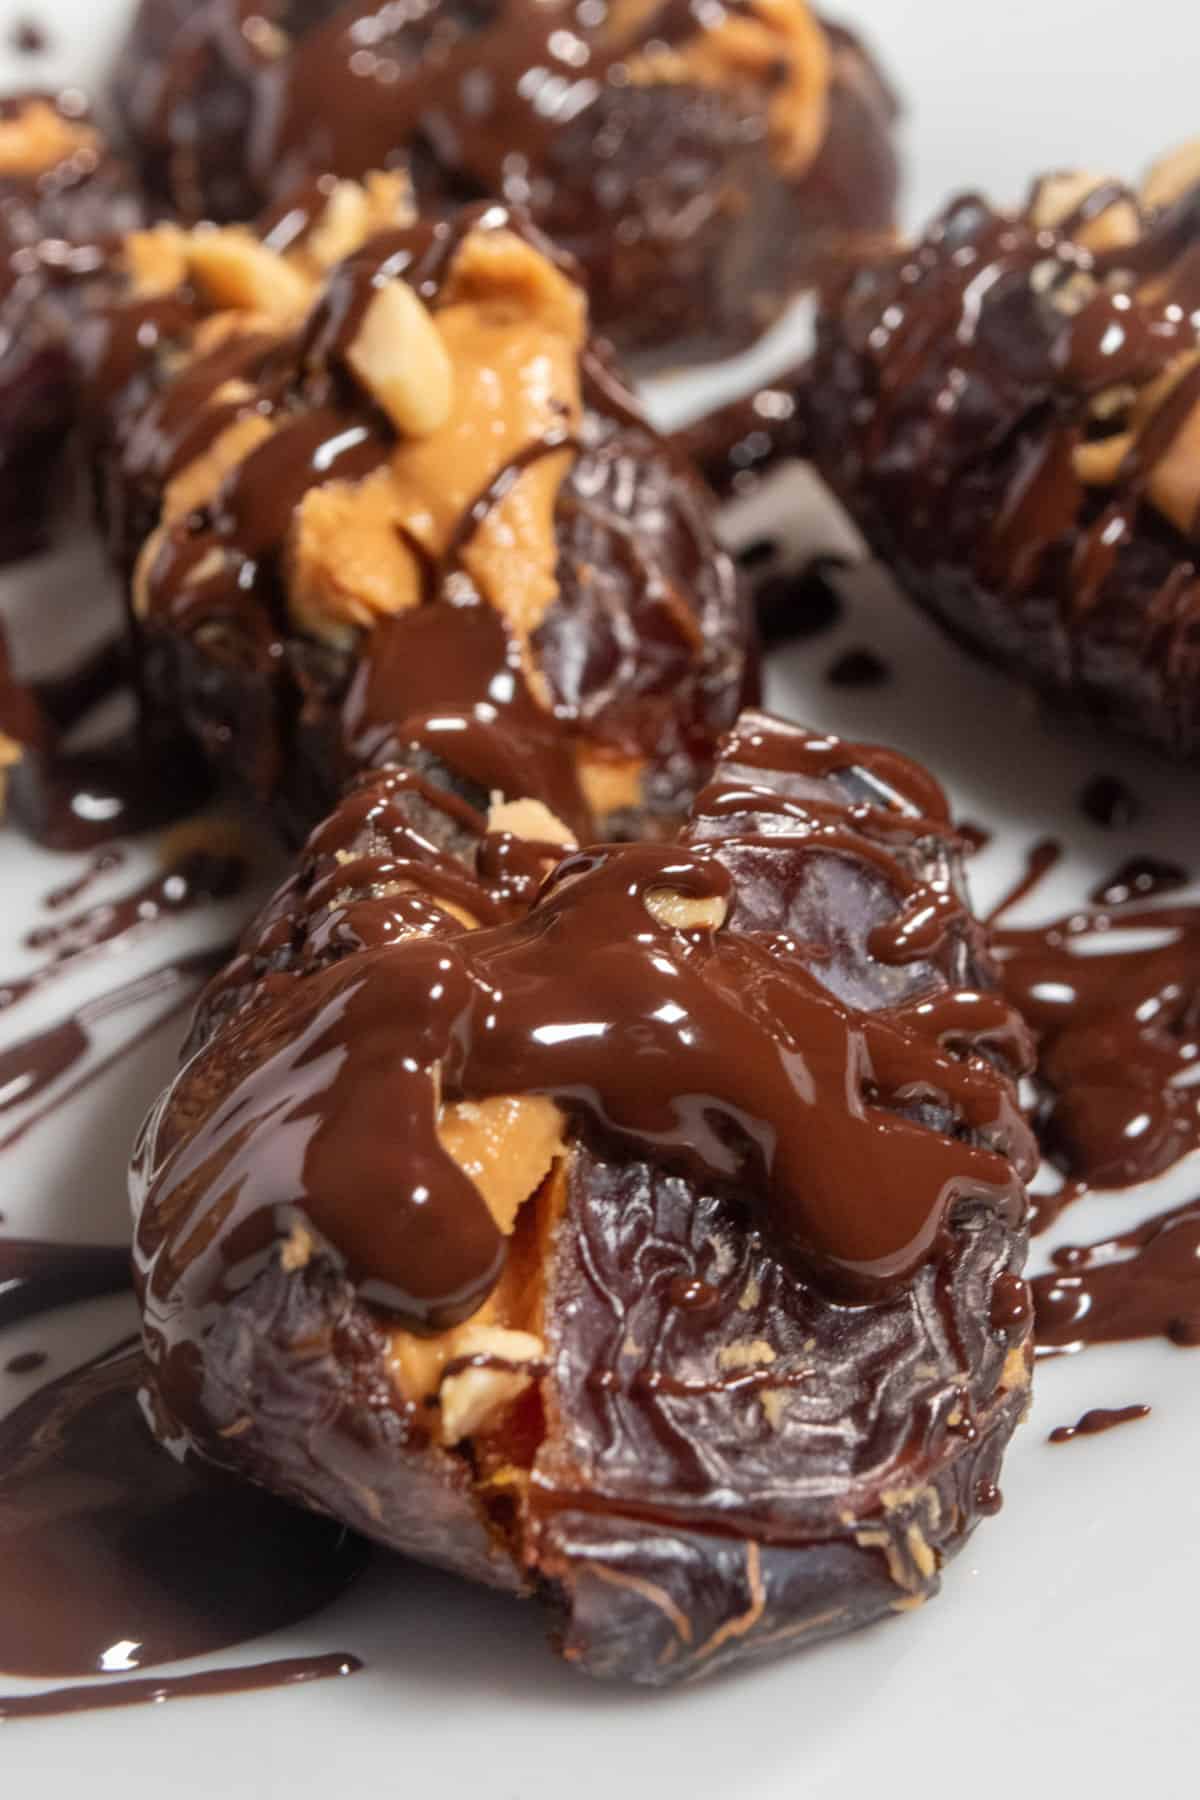 Several chocolate drizzled dates. It looks a little messy as there is a lot of chocolate dripping down the sides of the dates but they also look very delicious.